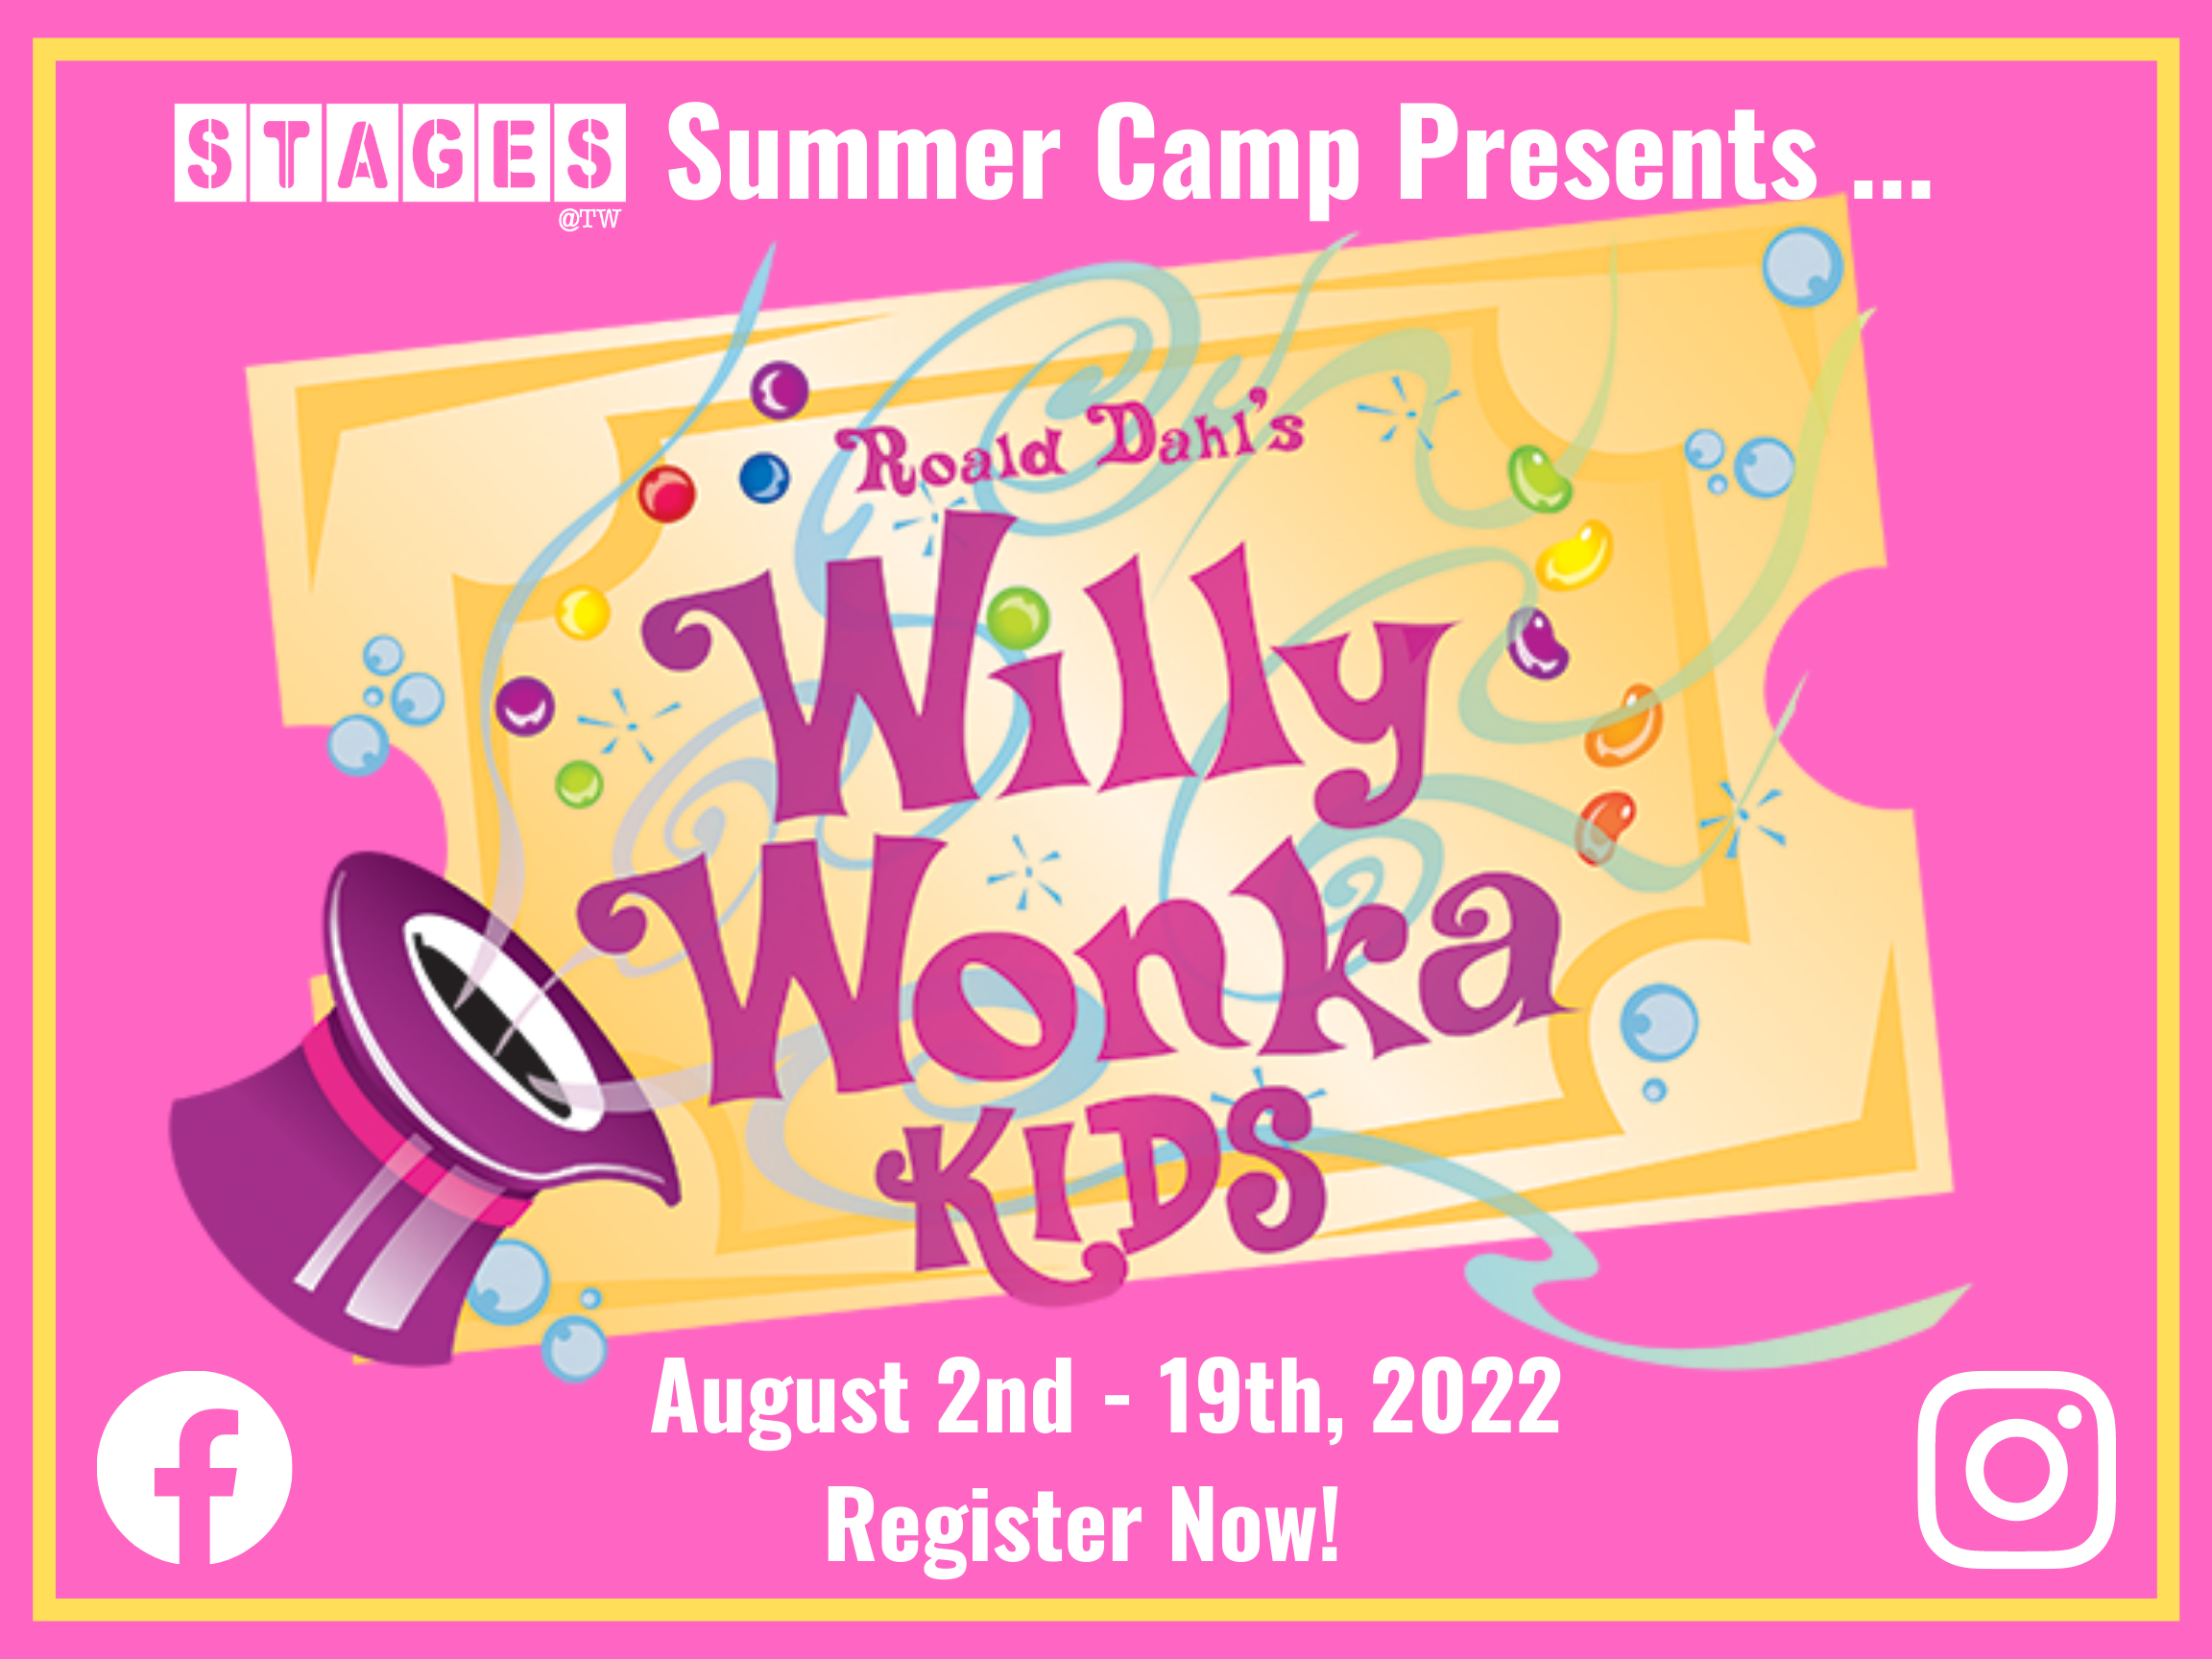 STAGES Summer Camp 2022